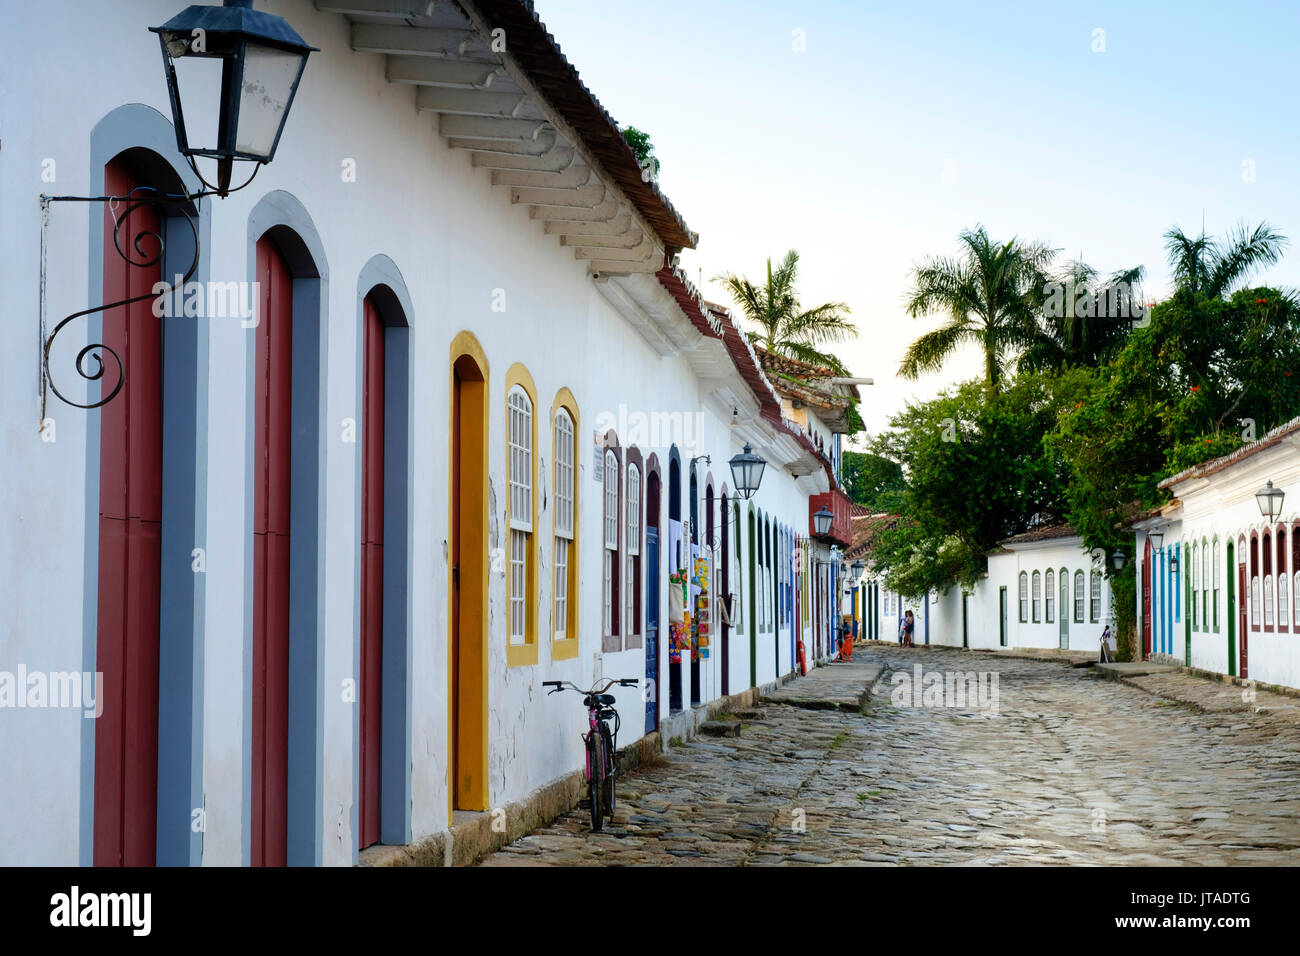 Portuguese colonial vernacular architecture in the centre of Paraty town on Brazil's Green Coast, Rio de Janeiro state, Brazil Stock Photo